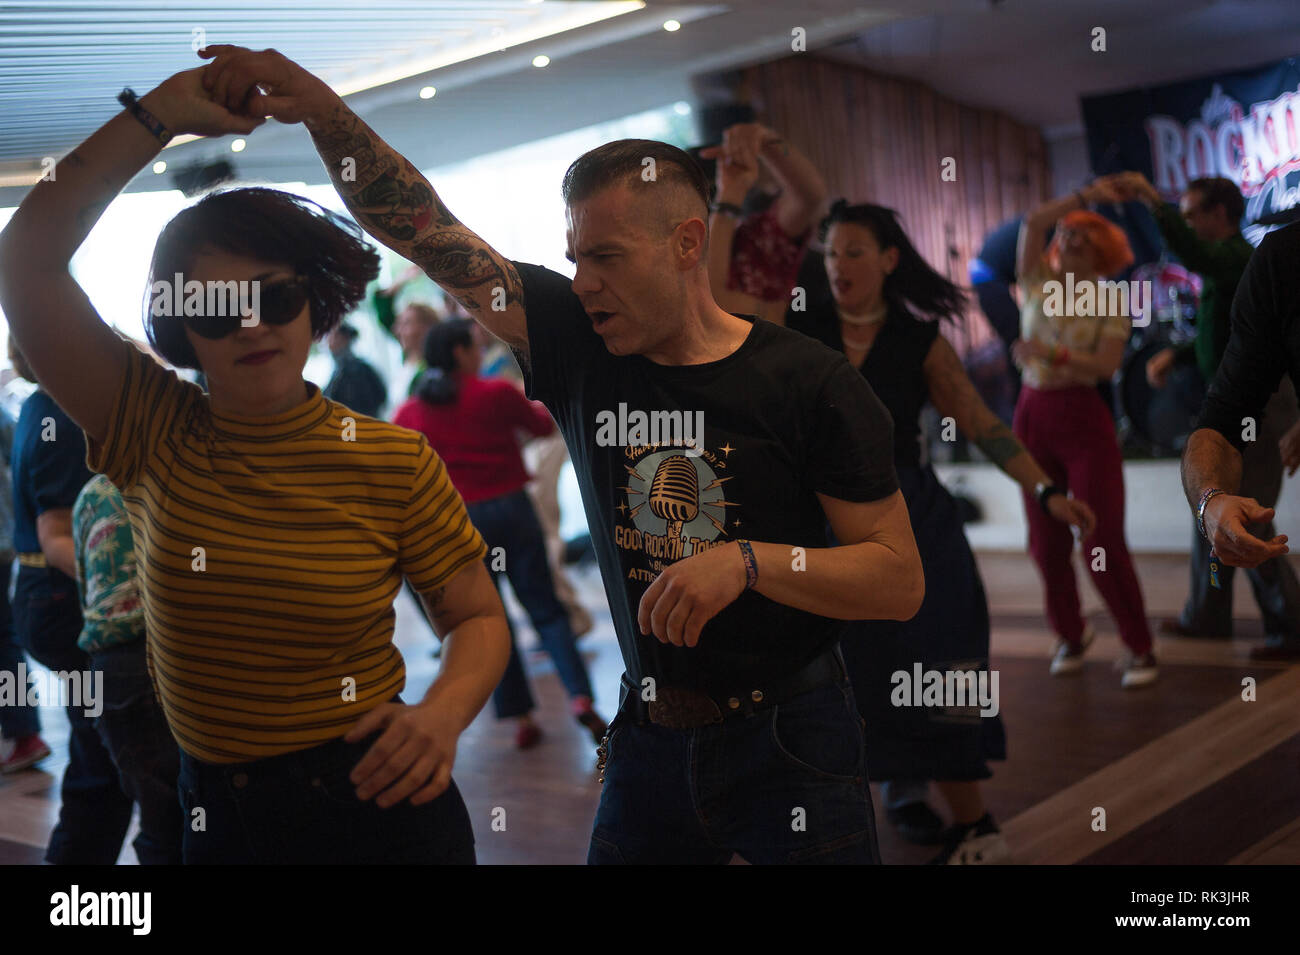 A couple are seen dancing during the Rockin Race Jamboree Festival. Thousands of people from around the world gather every year during The Rockin' Race Jamboree International Festival for four days in Torremolinos, a meeting place for all lovers of rockabilly and swing music Stock Photo